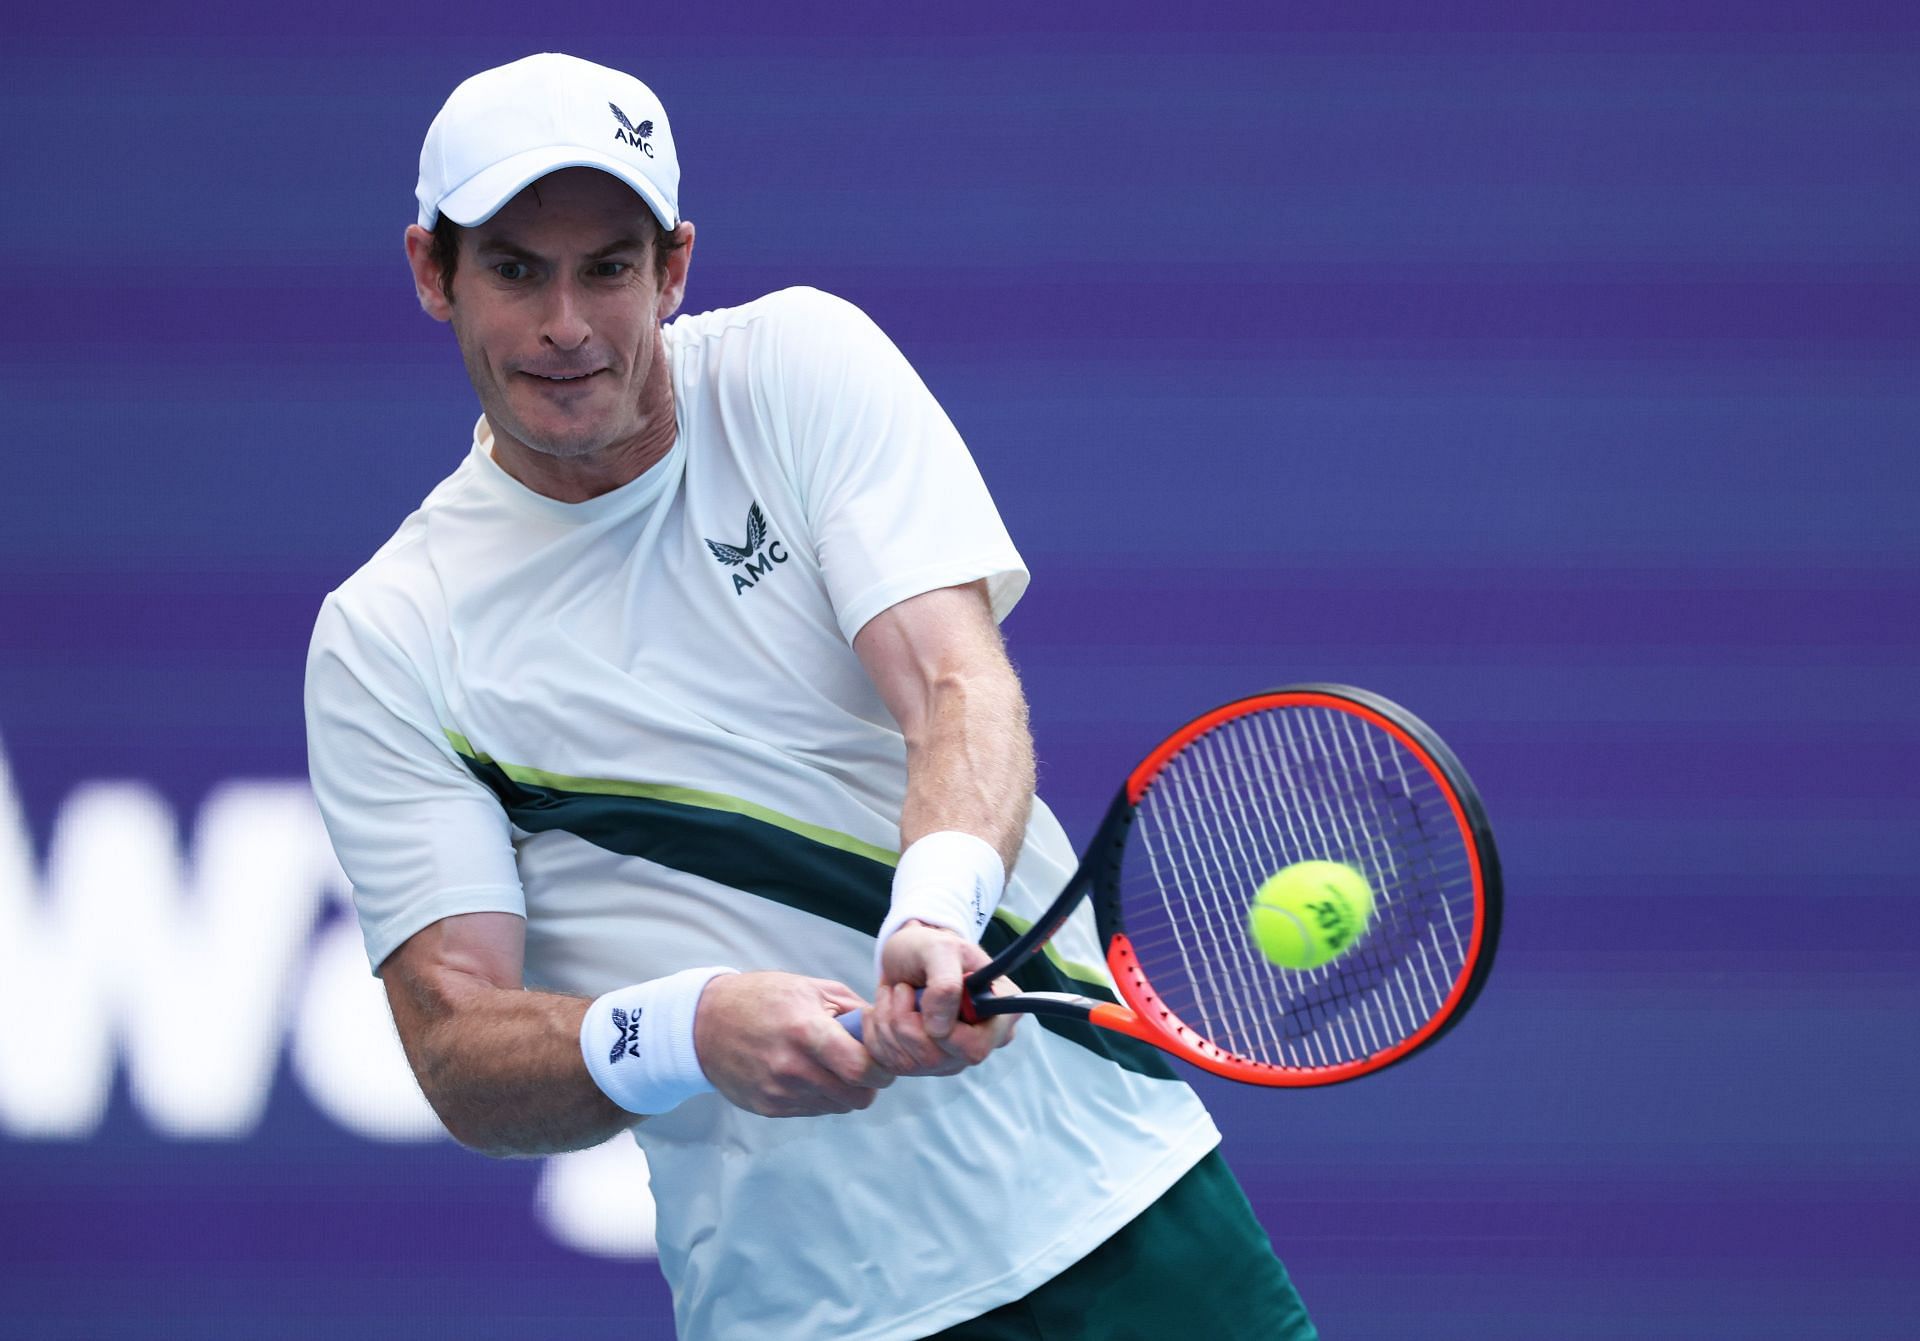 Two-time Miami Open champion Murray crashed out of the 2023 event in the opening round